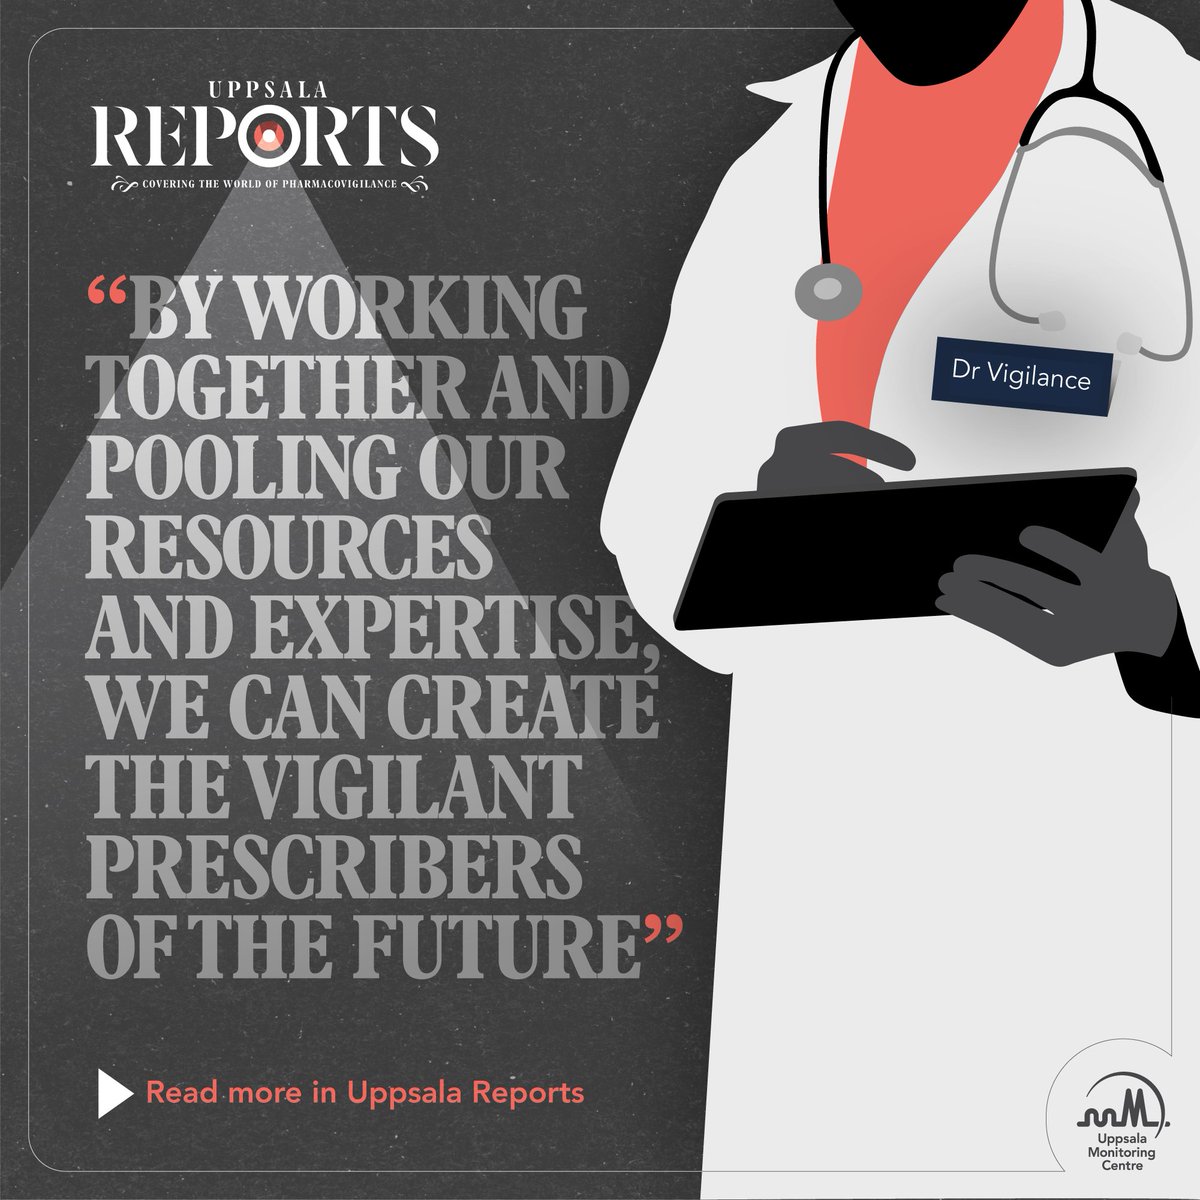 Calling Dr Vigilance 🩺

By modernising #pharmacovigilance education and placing PV at the heart of therapeutic reasoning and clinical activities, we can prepare the prescribers of the future to manage and report ADRs.

Read how in #UppsalaReports 👉 uppsalareports.org/latest-issues